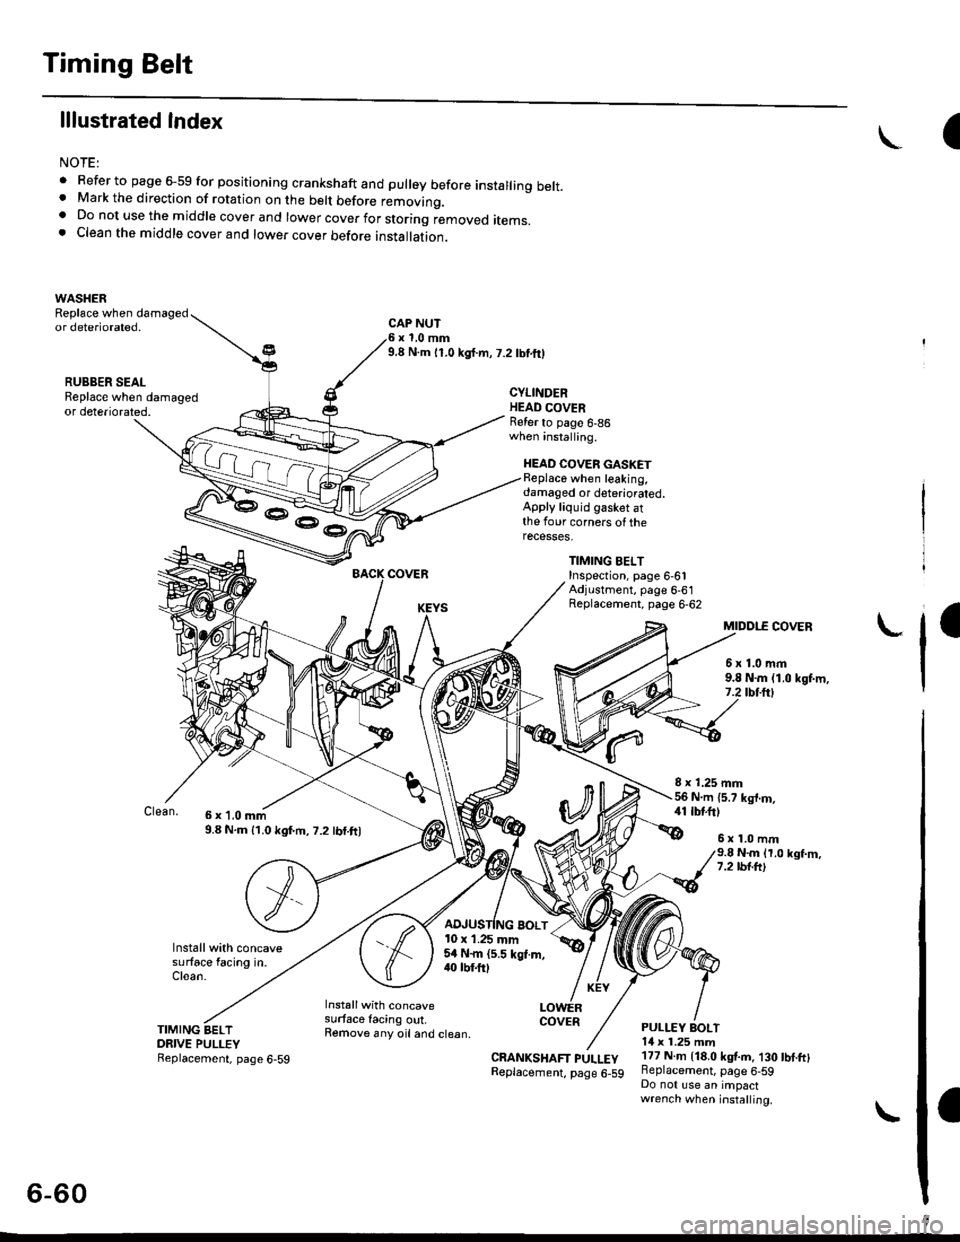 HONDA CIVIC 1999 6.G User Guide Timing Belt
lllustrated Index
NOTE:
. Refer to page 6-59 for positioning crankshaft and pulley before installing belt.. Mark the direction of rotation on the belt before removino.a Do not use the midd